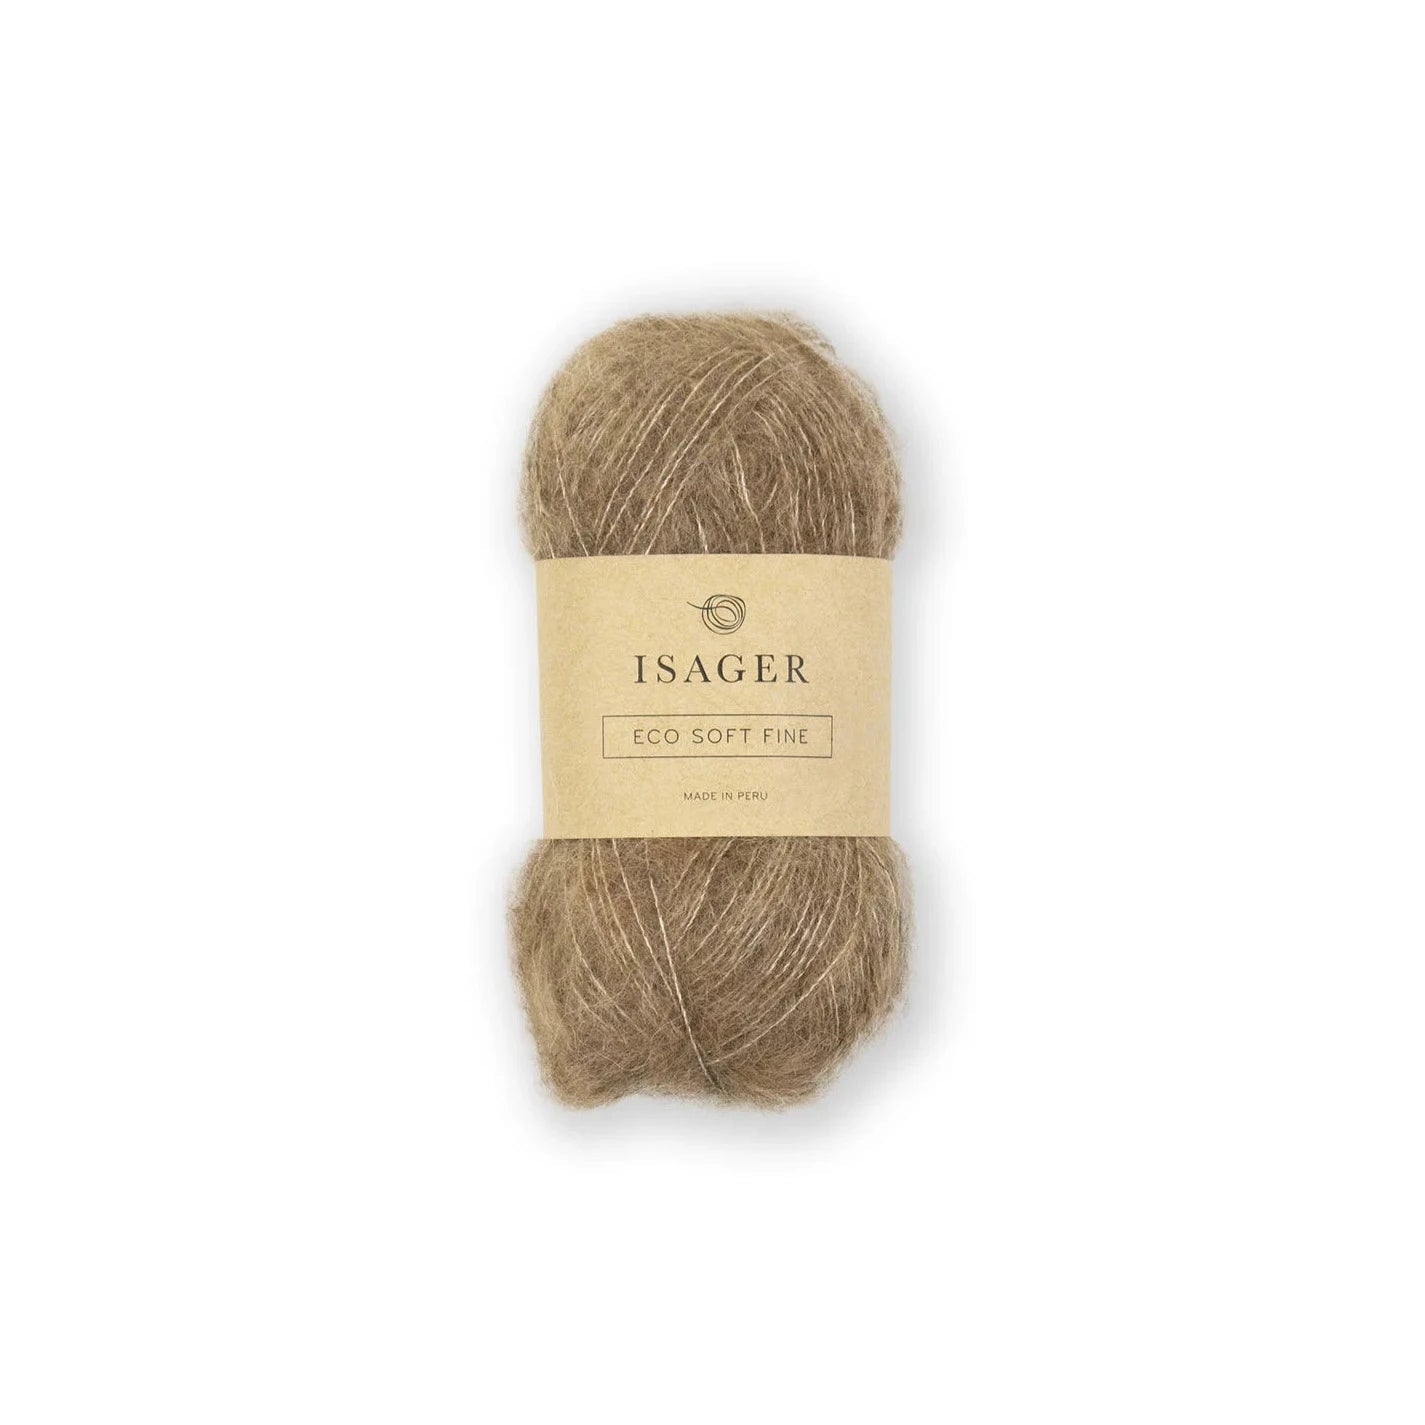 Isager Soft Fine - Isager - E7s - The Little Yarn Store